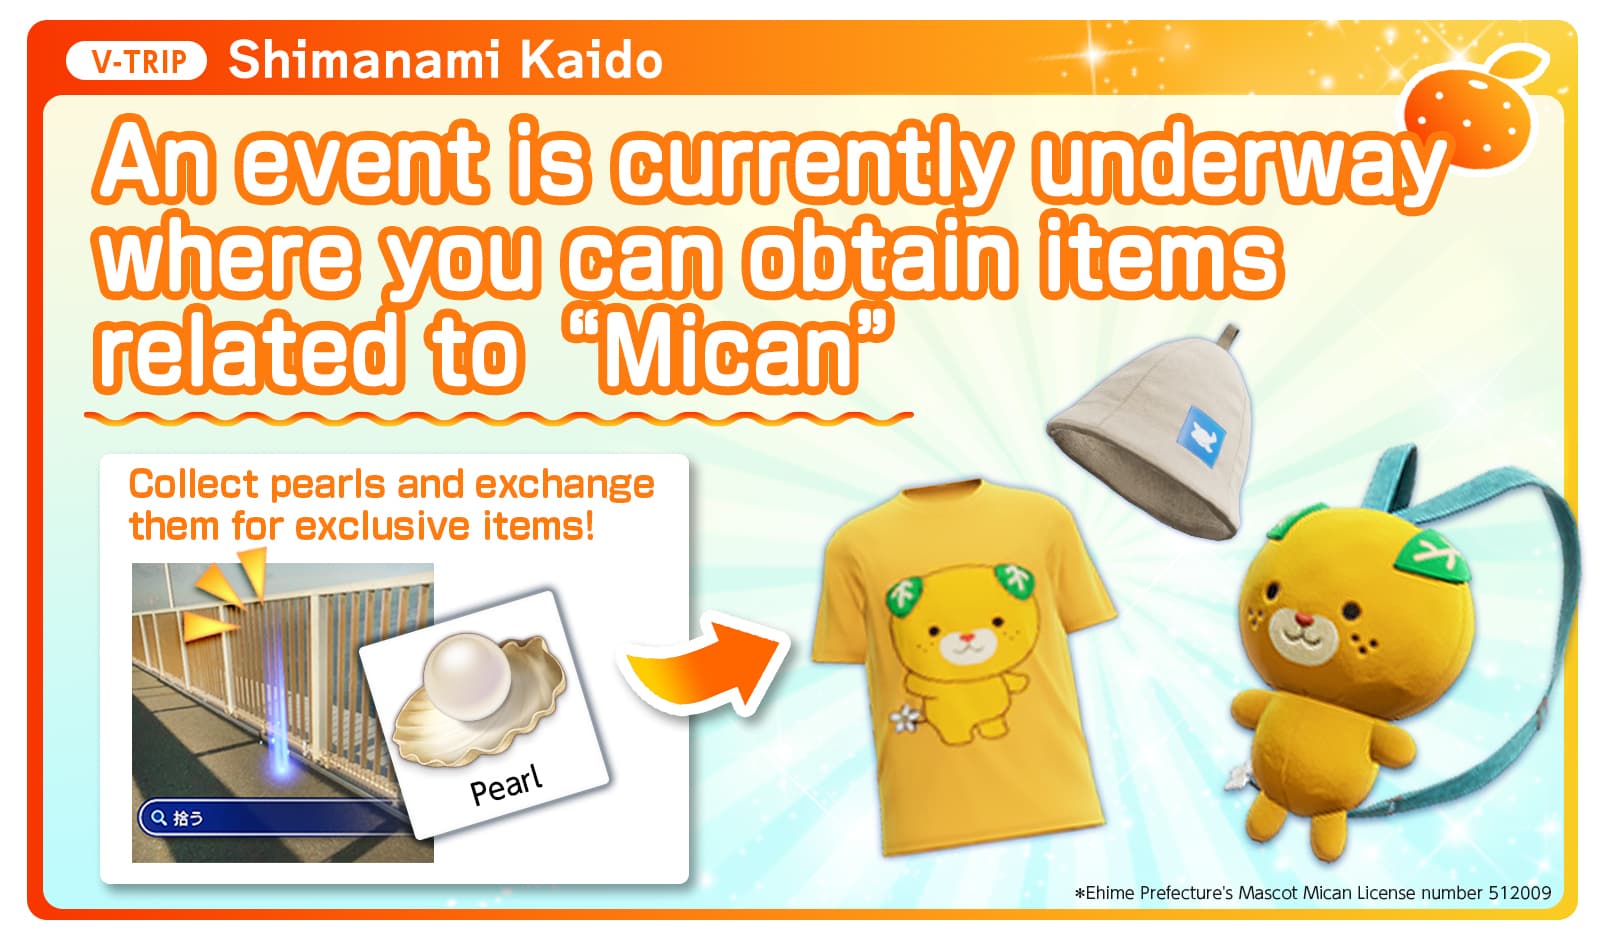 Collect pearls and exchange them for exclusive items!